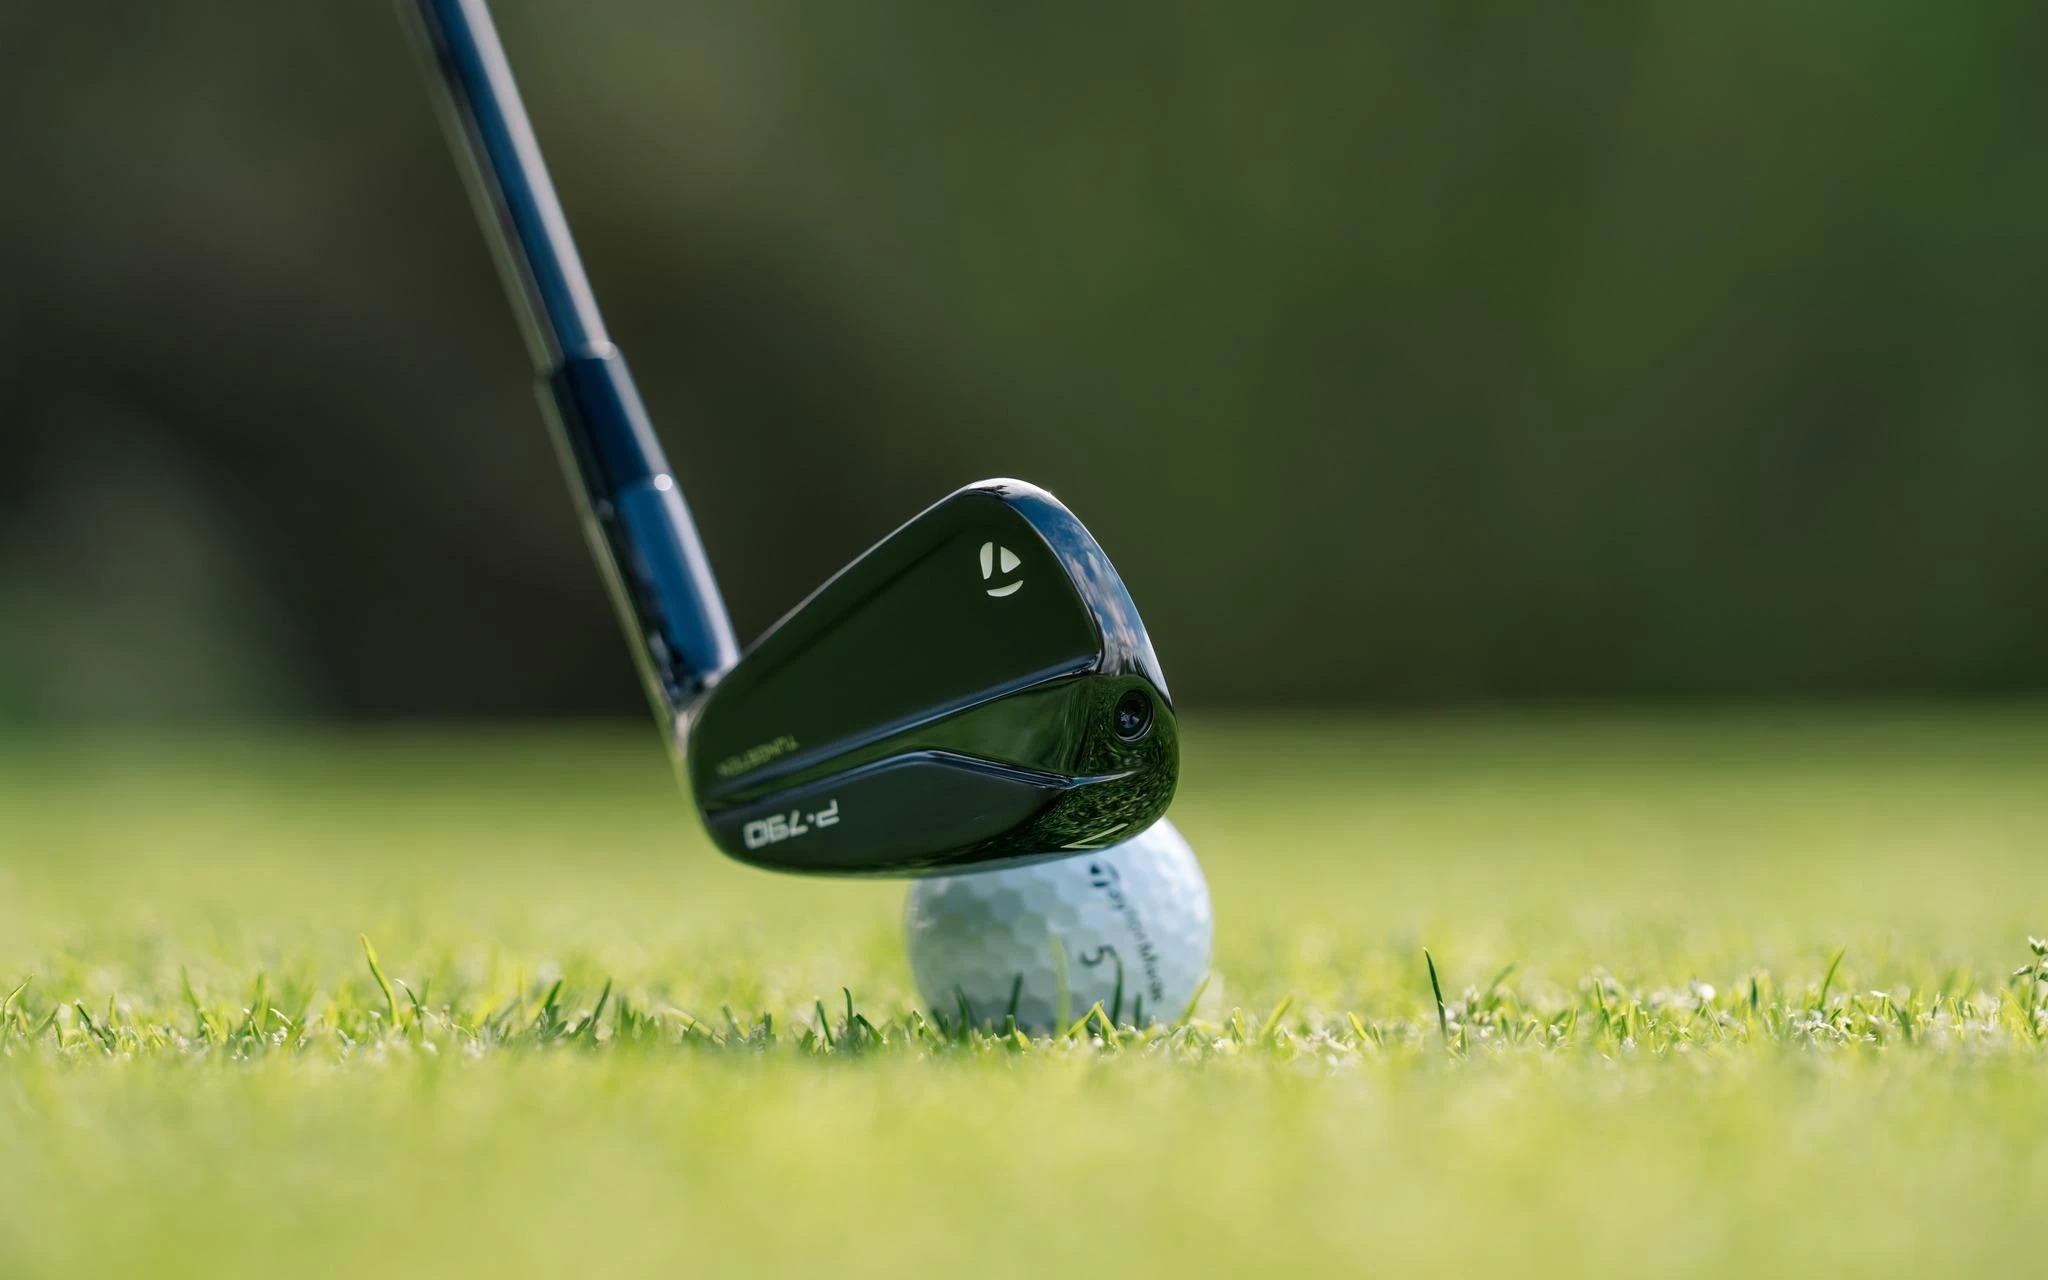 all-new P790 Phantom Black irons from TaylorMade